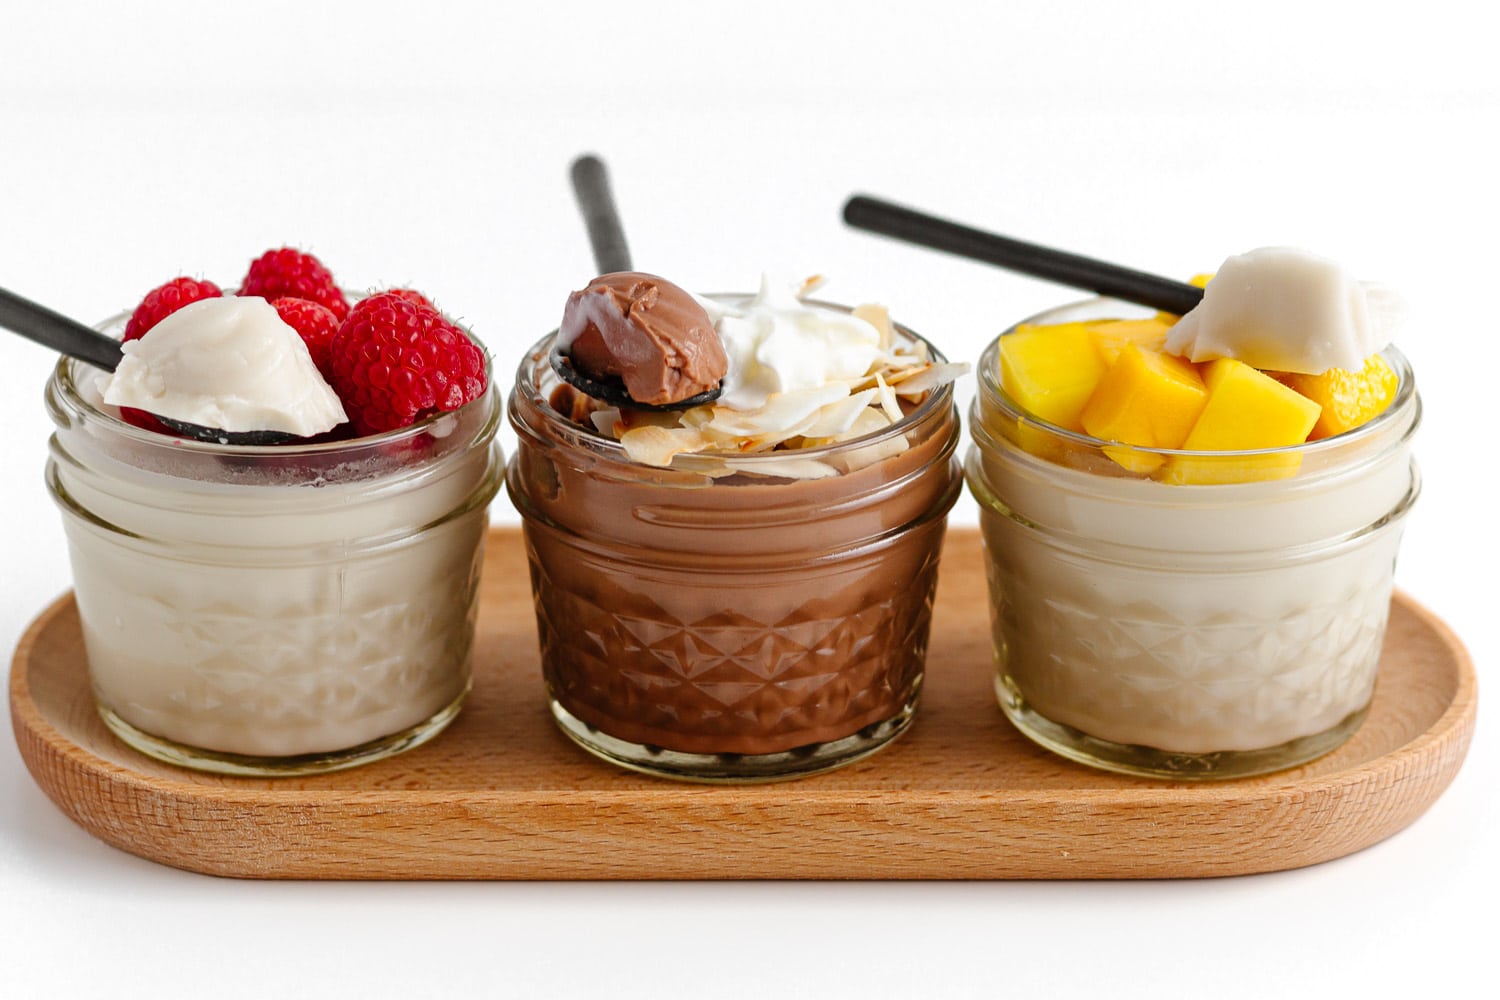 Three jars of vanilla and chocolate flavored coconut jelly with various toppings.